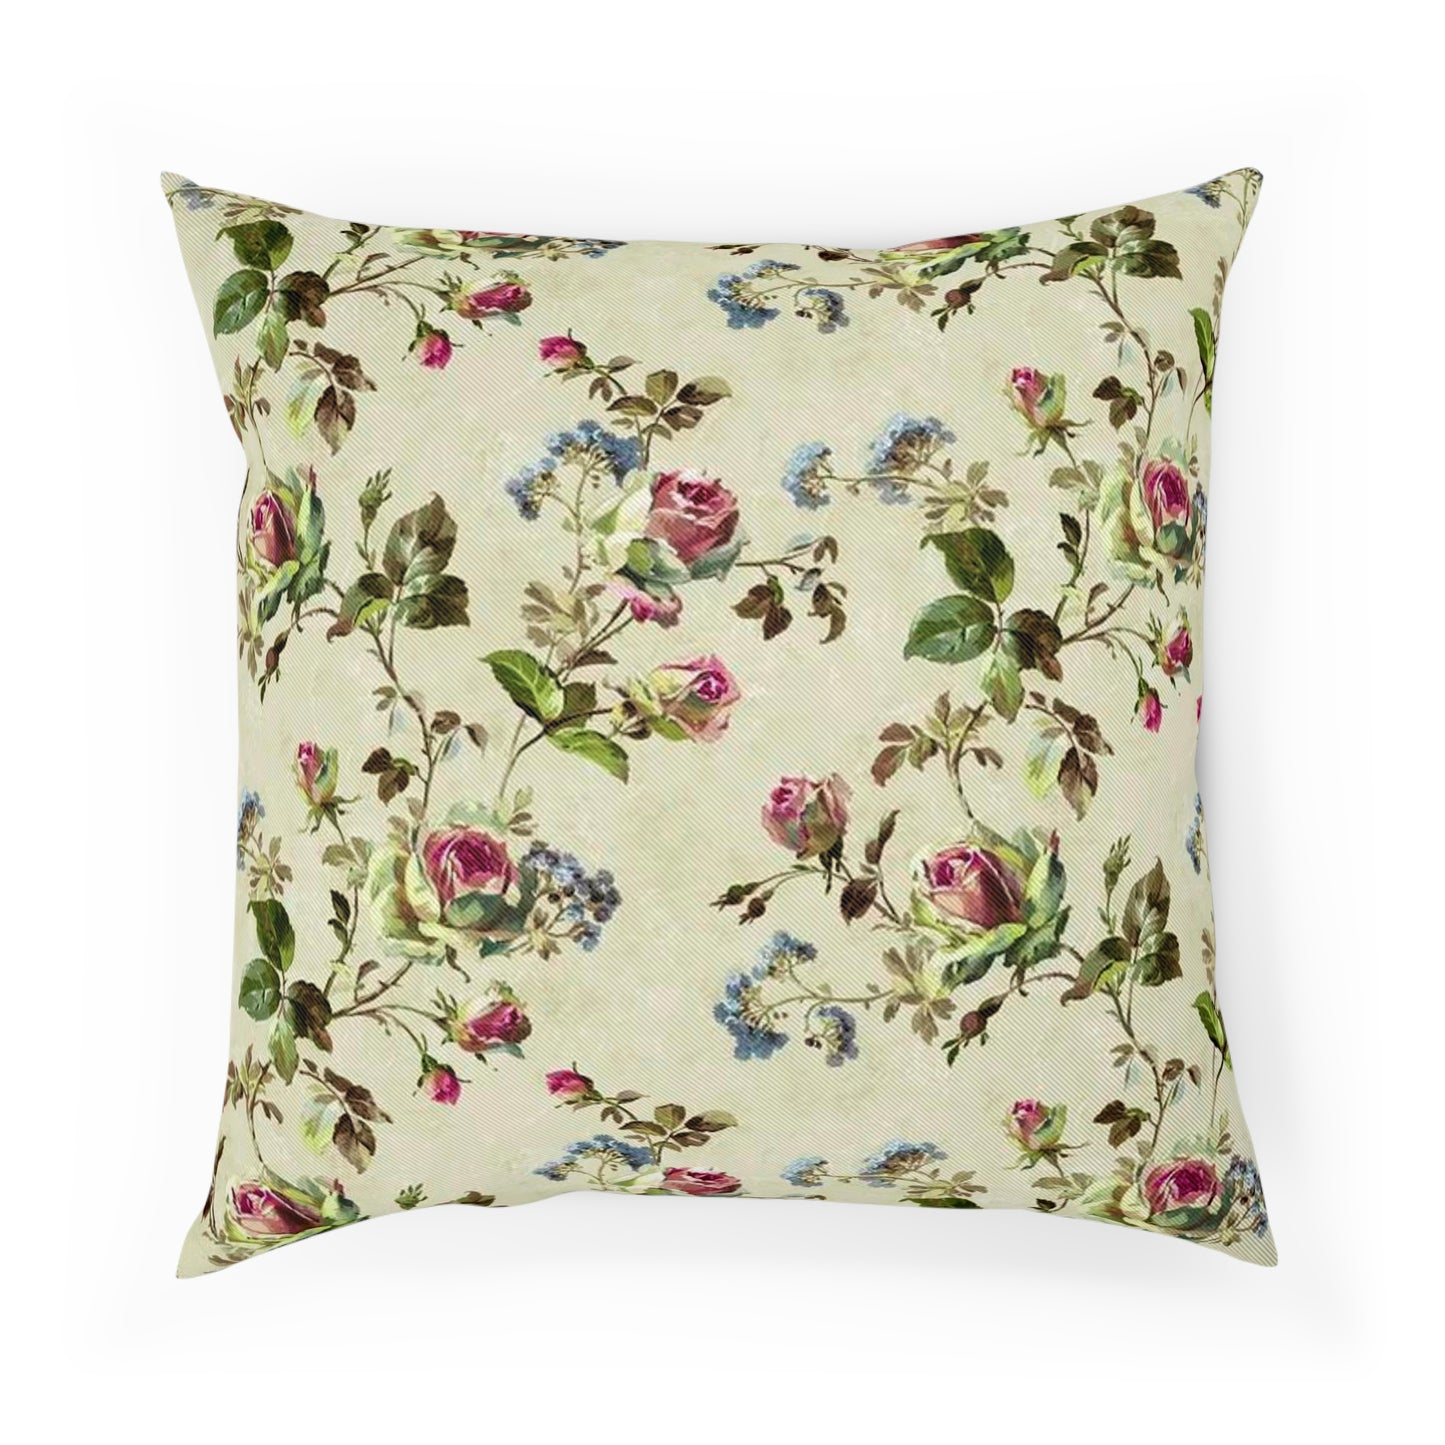 Delicate Rose Floral Vintage Throw Pillow 100% Cotton Cushion Cover